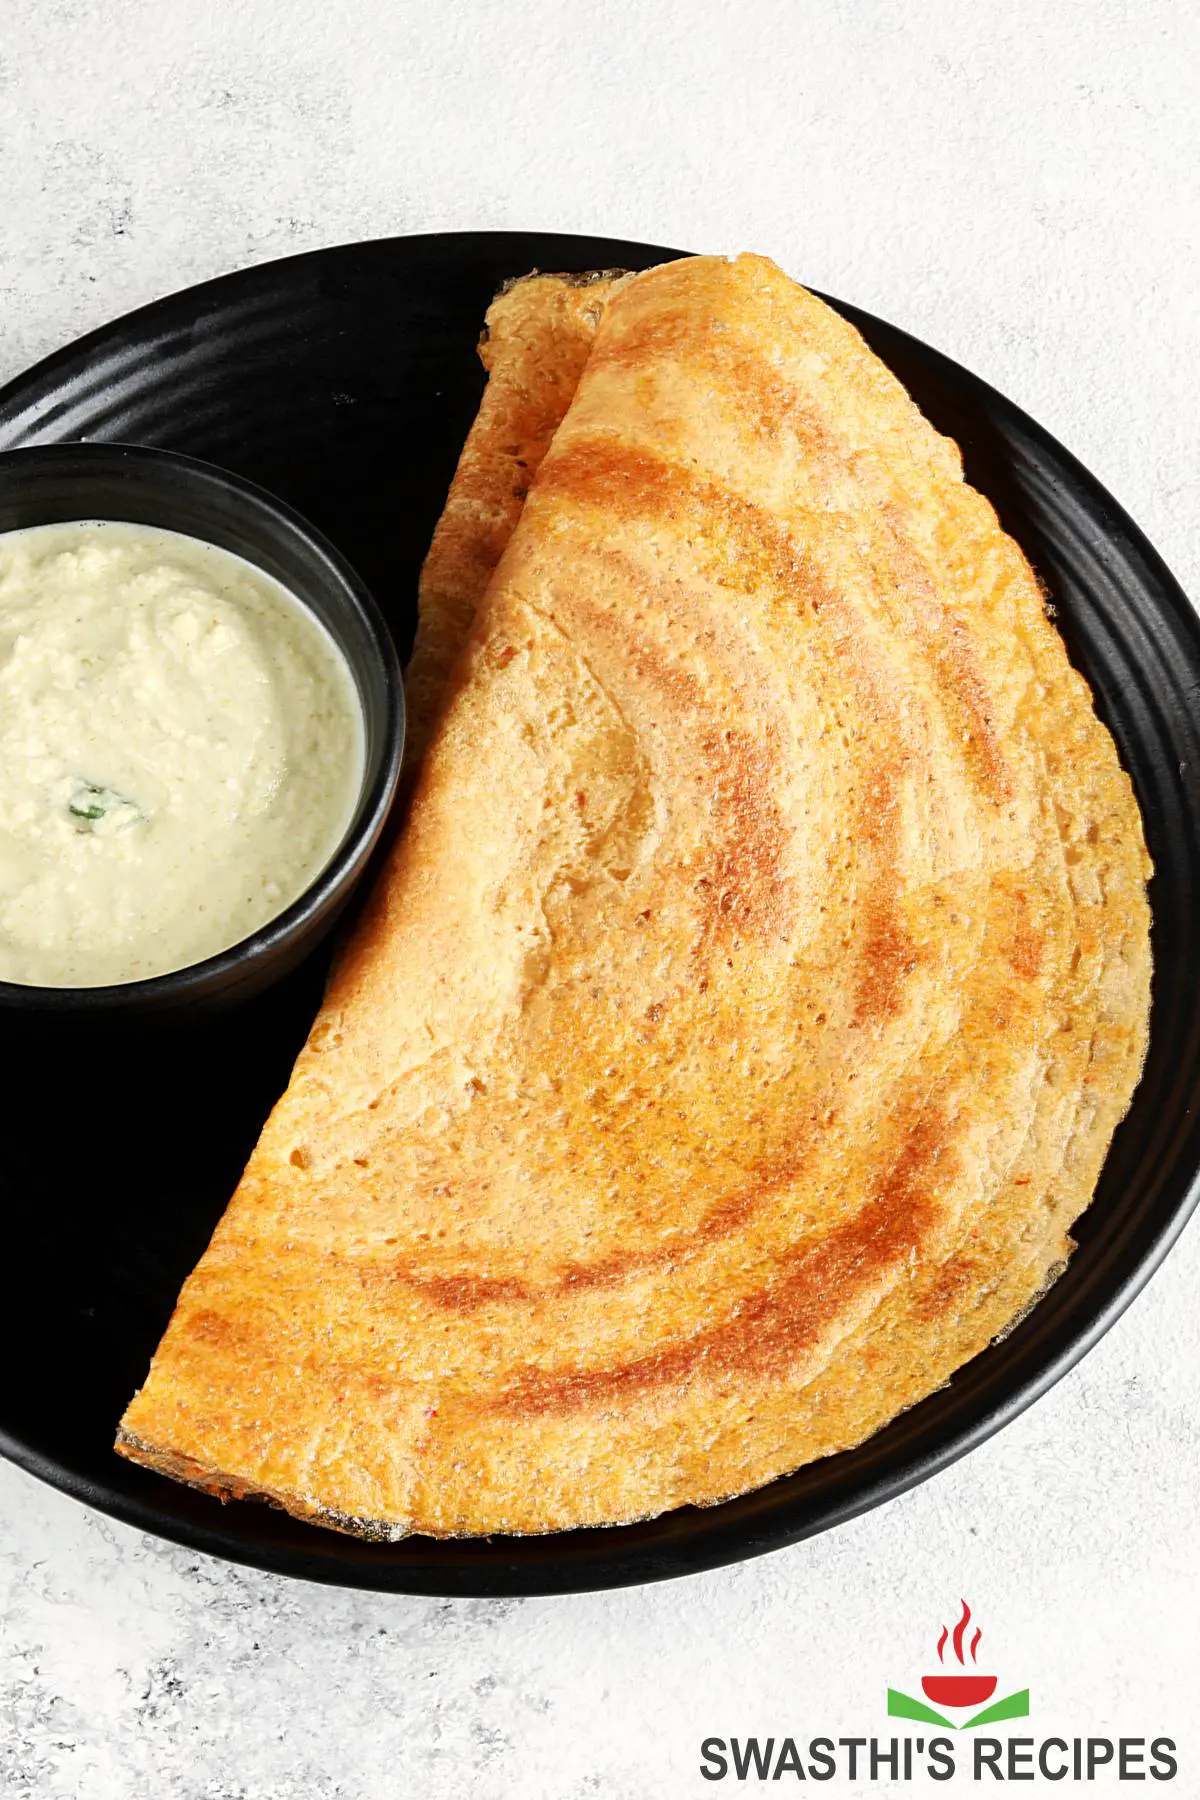 Does Dosa Have Protein: Protein Presence in the Dosa Delight